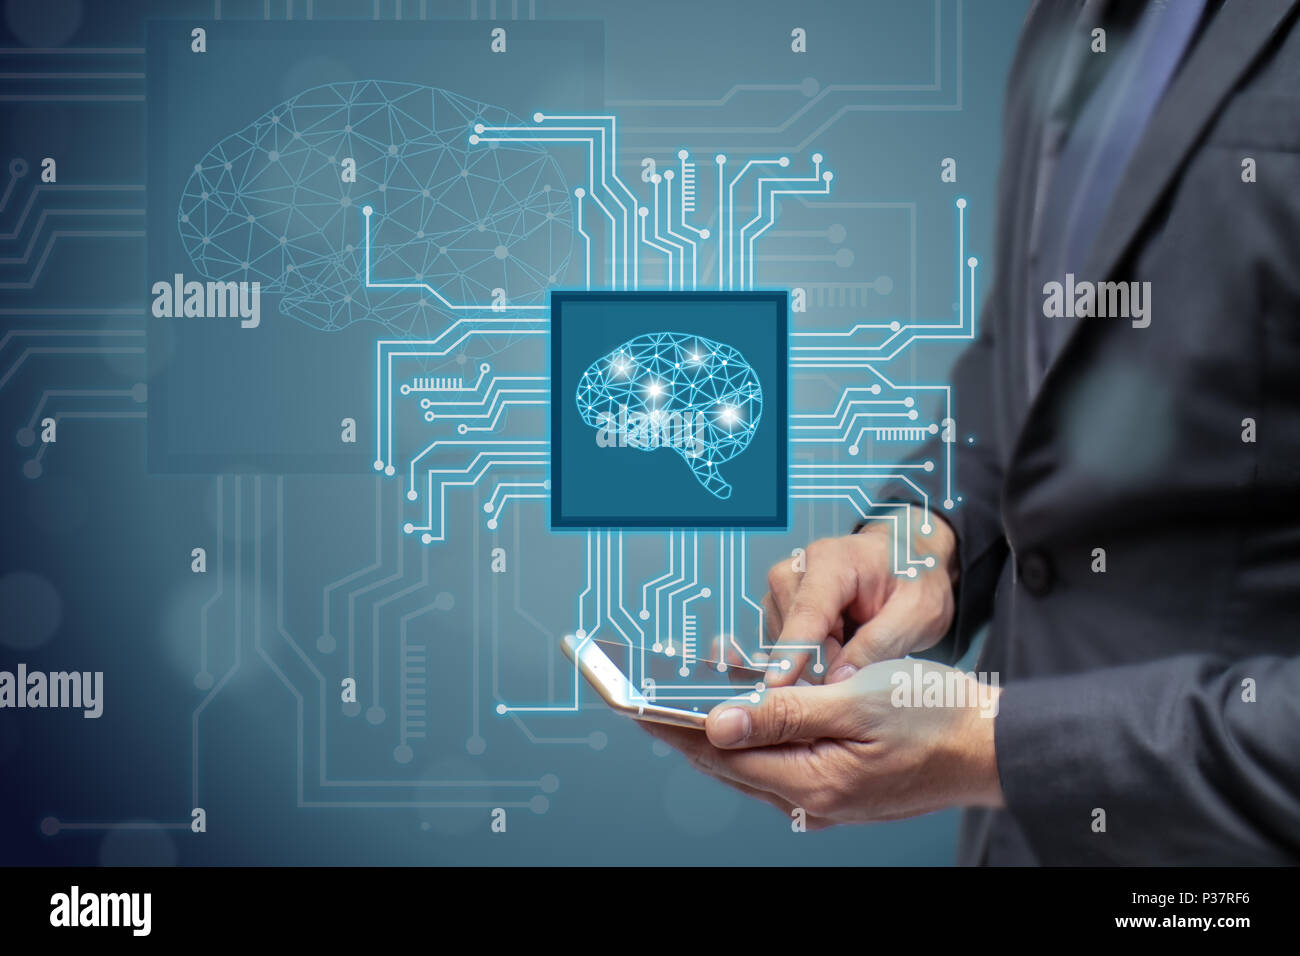 business man or engineer use ai or artificial intelligent concept,Cloud computing, data mining, machine learning, neural networks to monitor, research Stock Photo